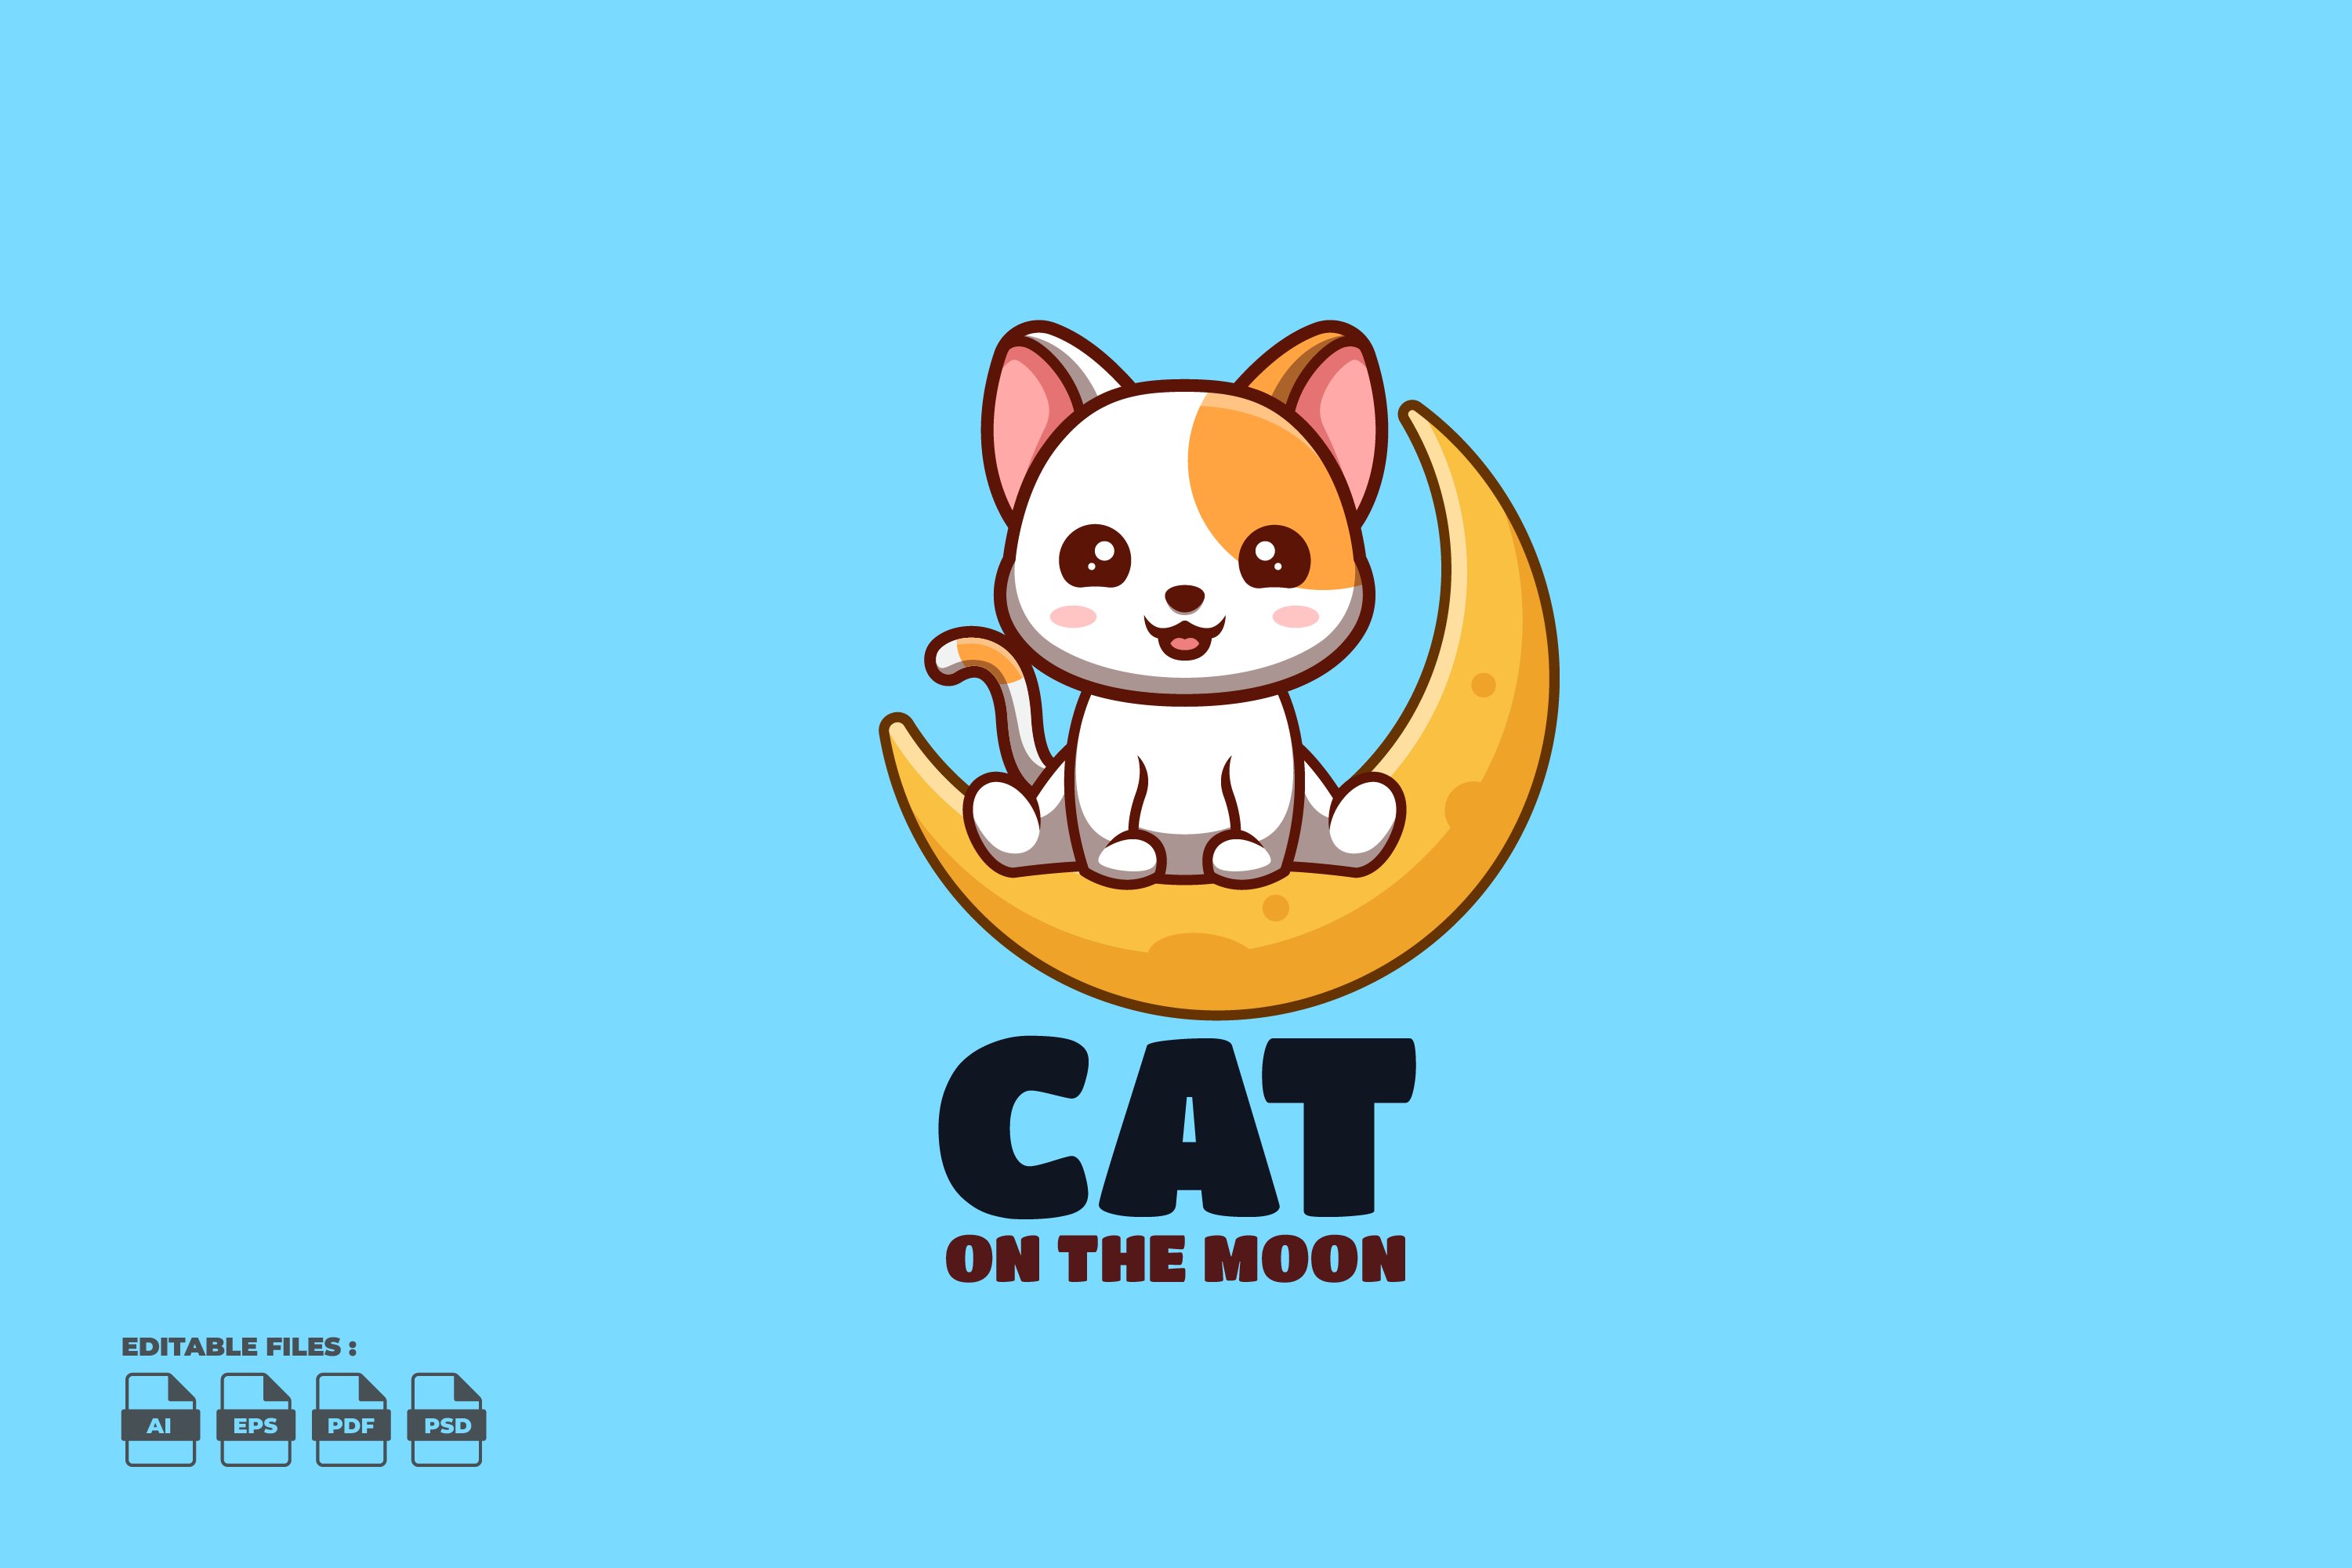 On The Moon White Cat Cute Mascot Lo cover image.